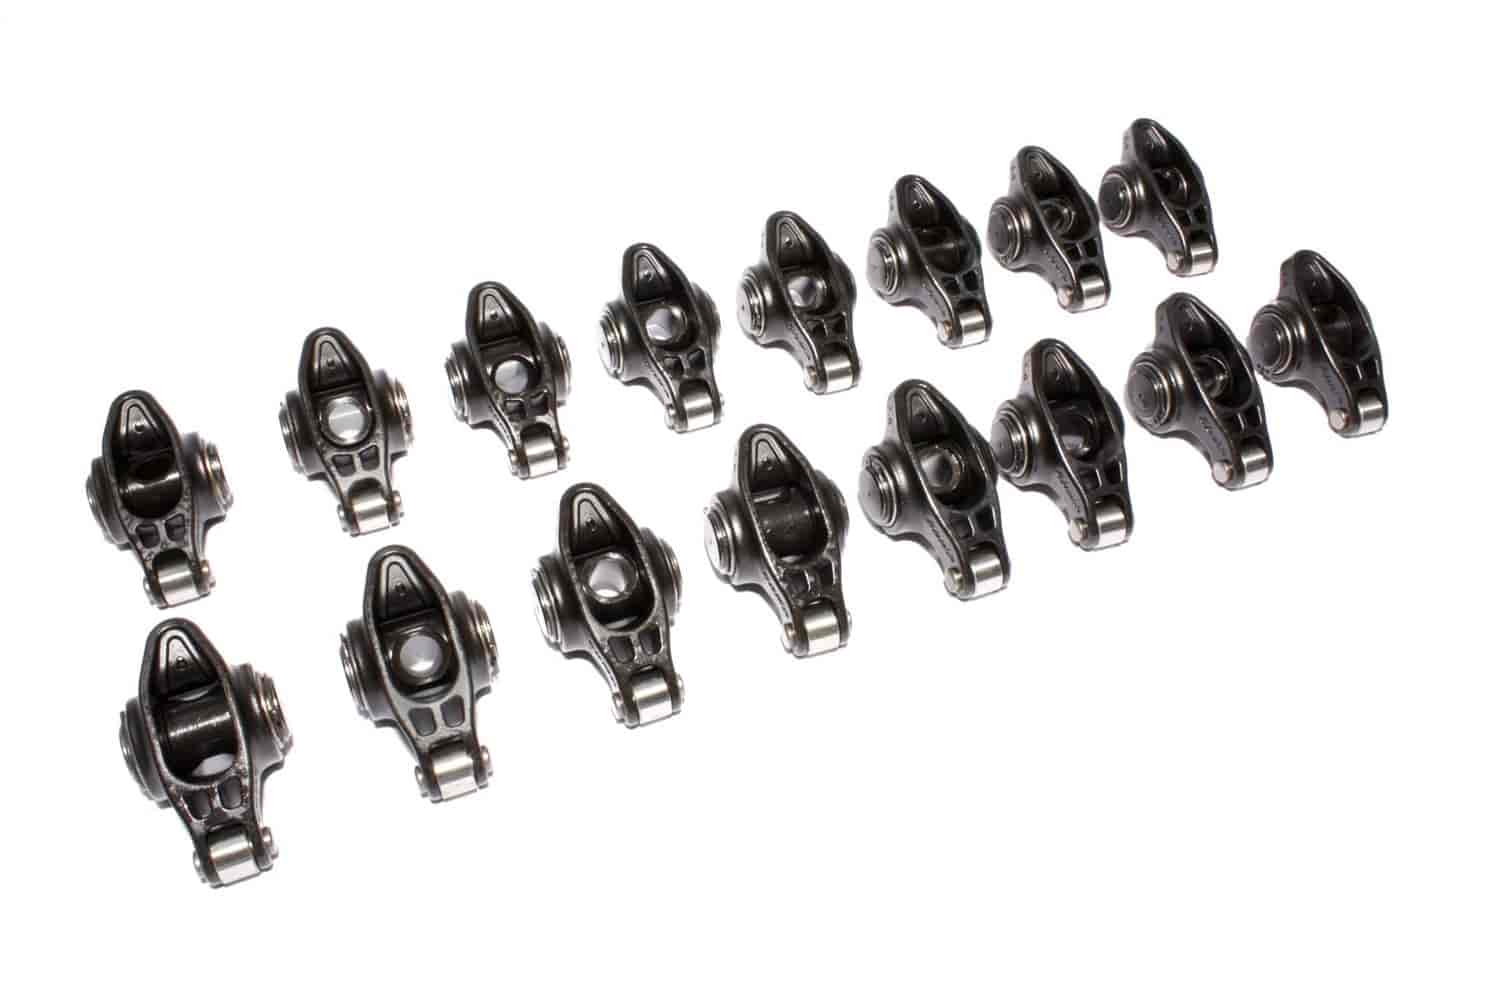 Ultra Pro Magnum Rocker Arms Chevy Small Block V8 265-400